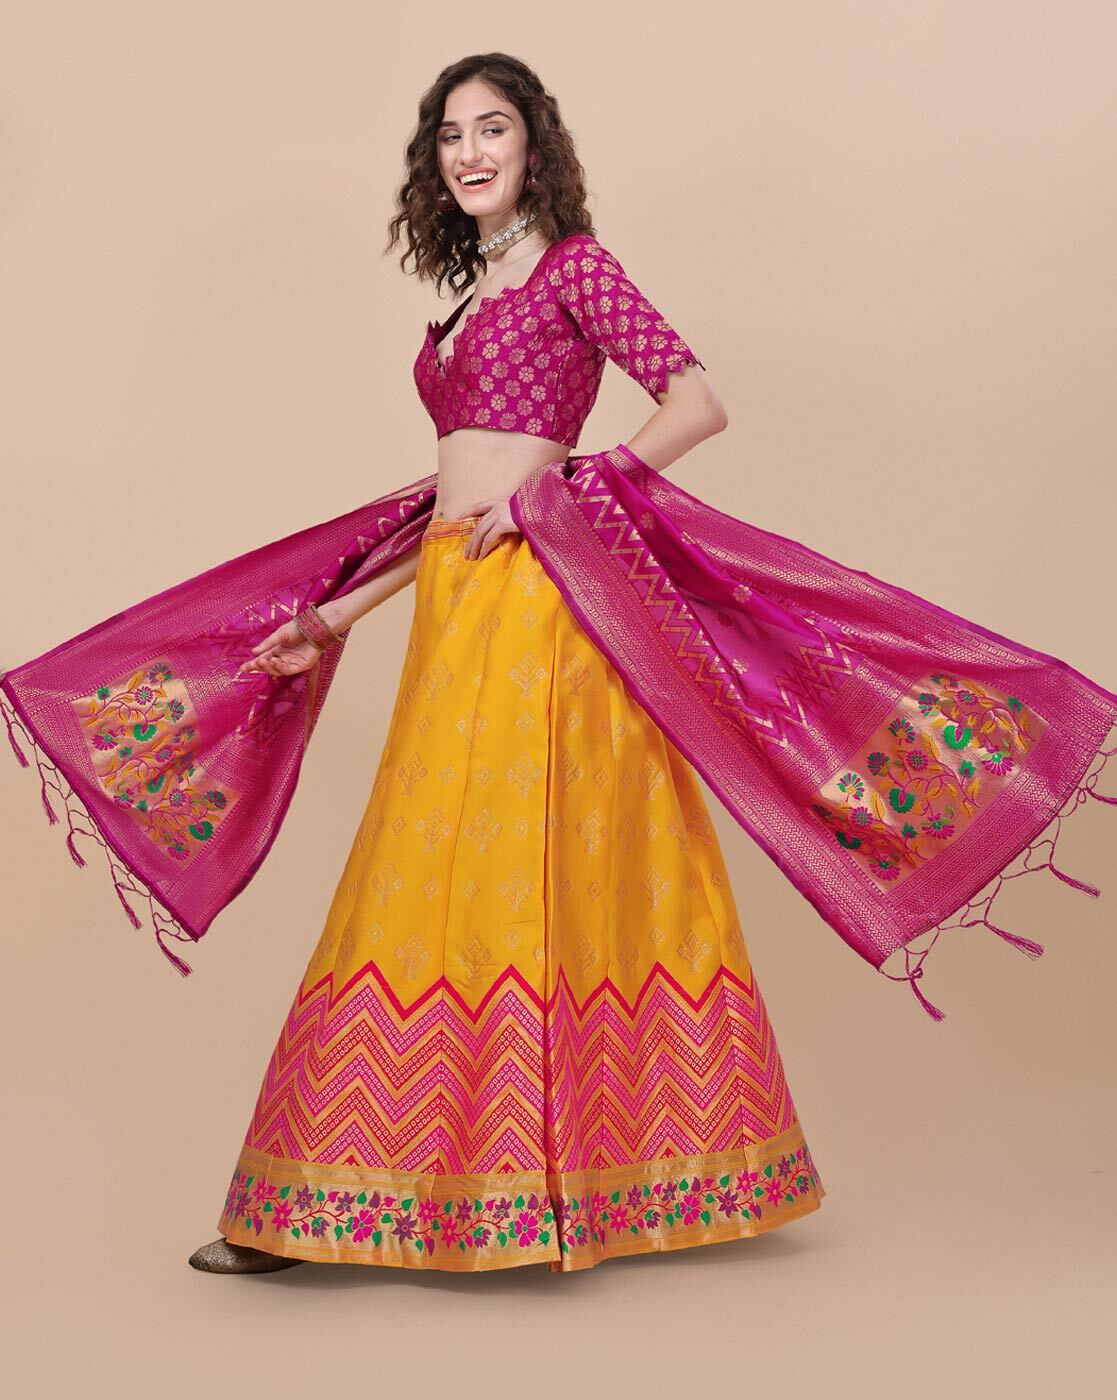 The Prettiest Yellow Lehengas We Spotted For You To Consider For Your  Haldi! | WedMeGood